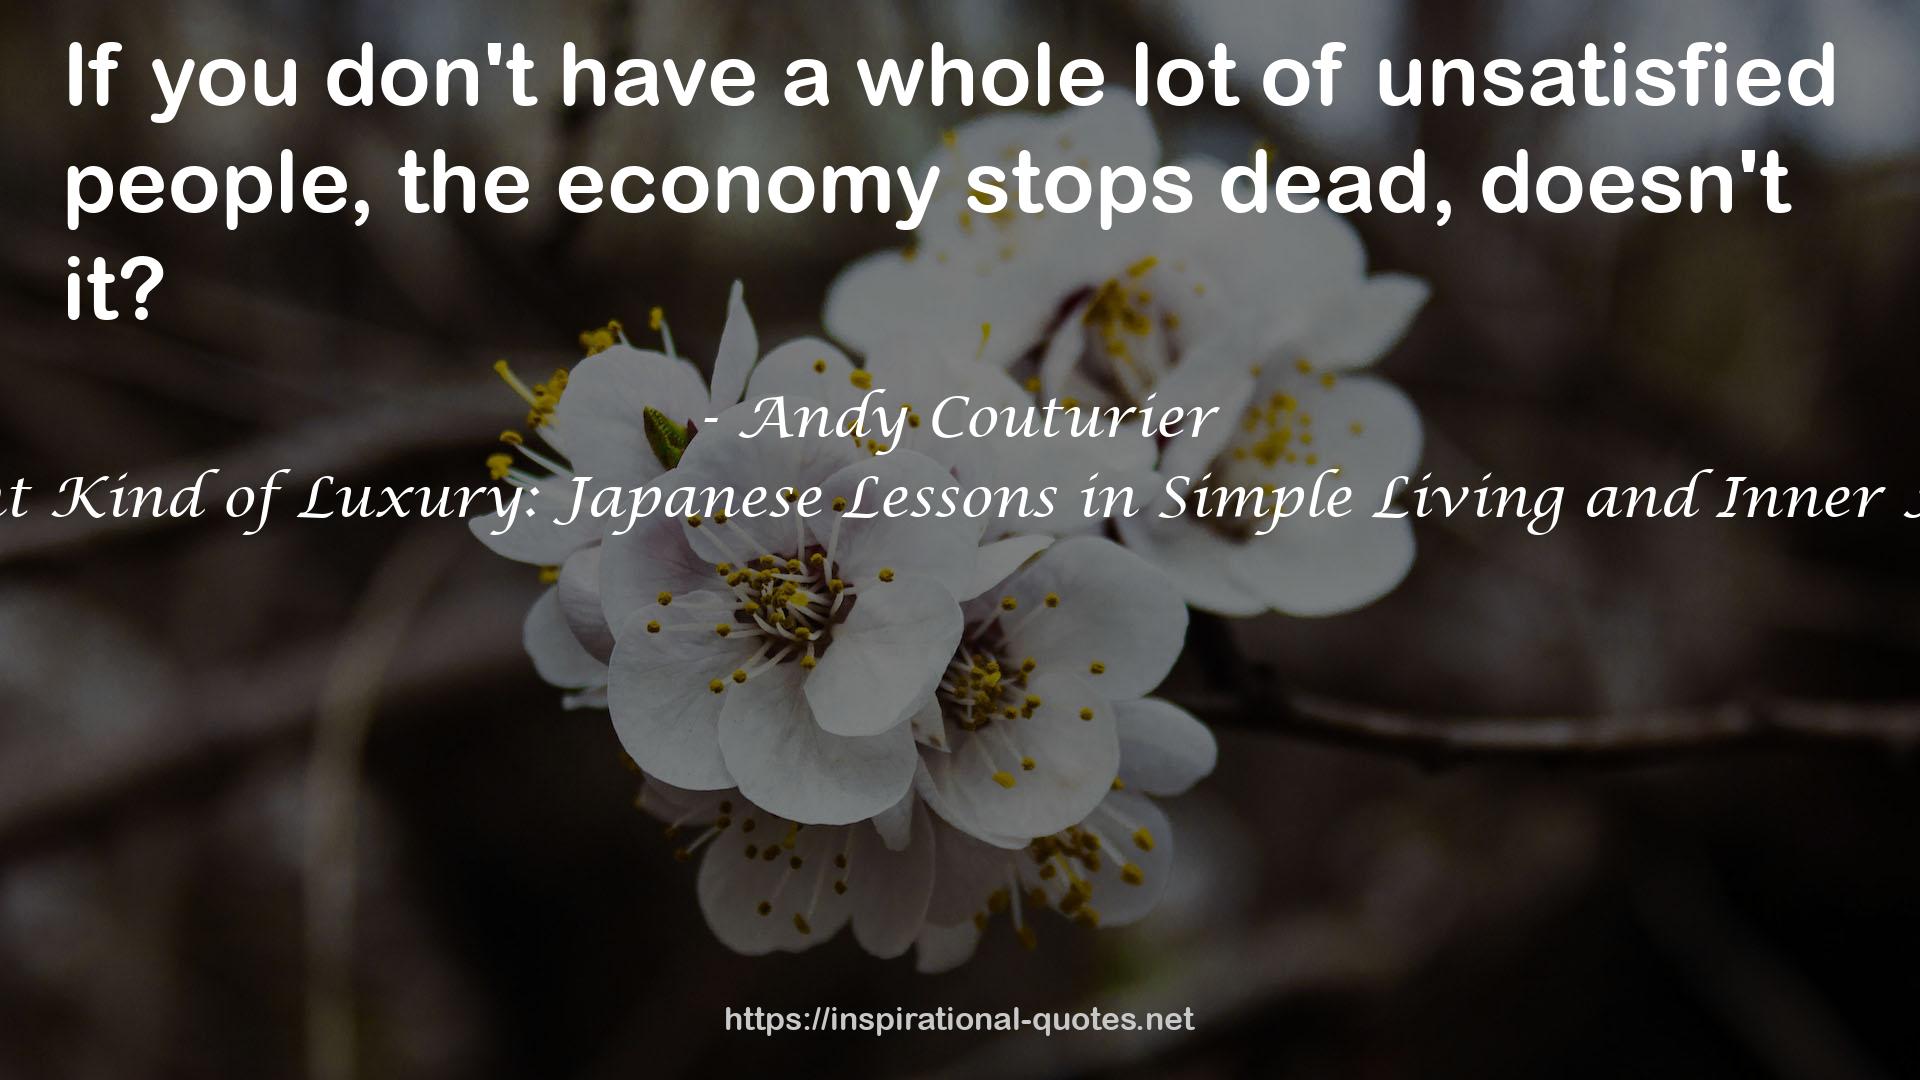 A Different Kind of Luxury: Japanese Lessons in Simple Living and Inner Abundance QUOTES